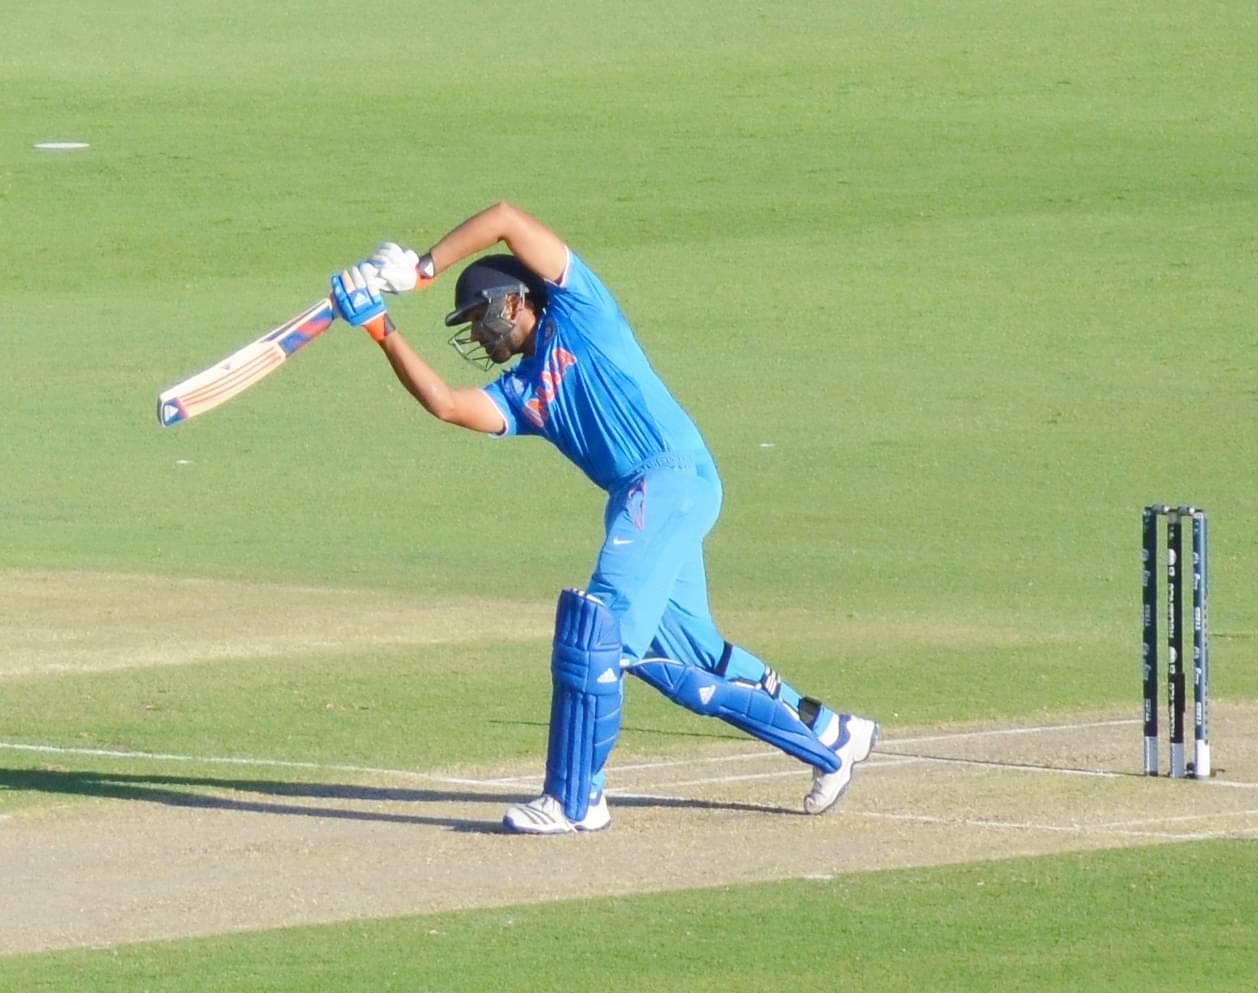 India's Predicted Playing XI for the third T20I